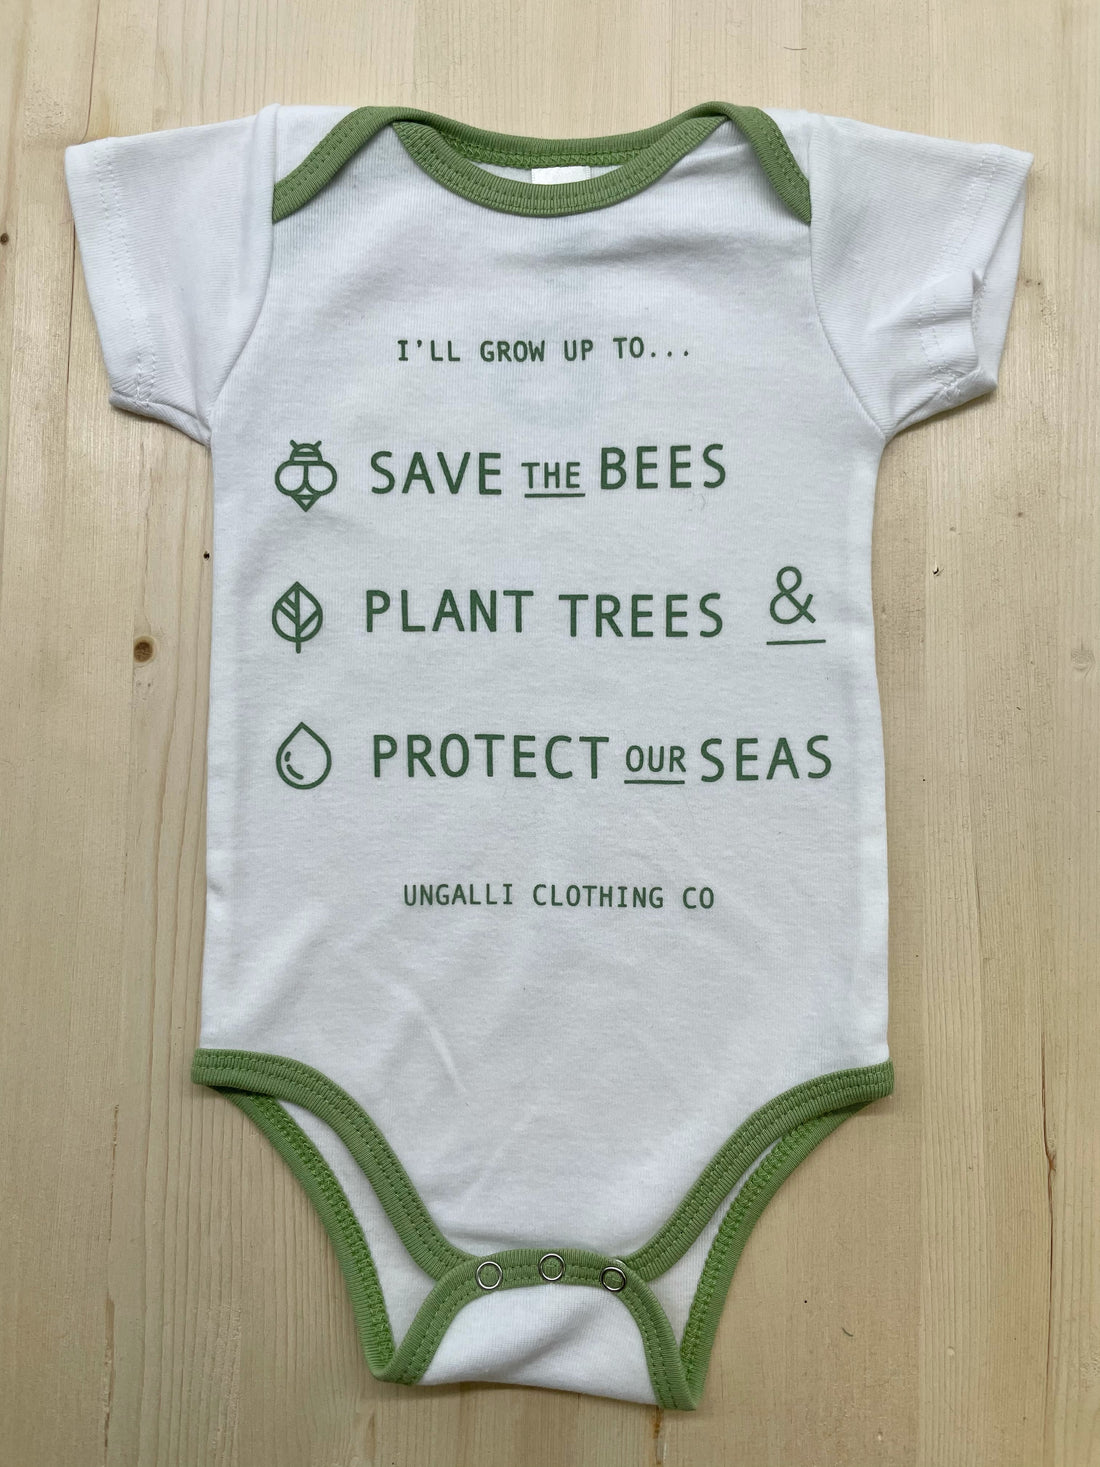 Babies organic onesie in white with green text that states: "Save the bees, plant trees & protect our seas"